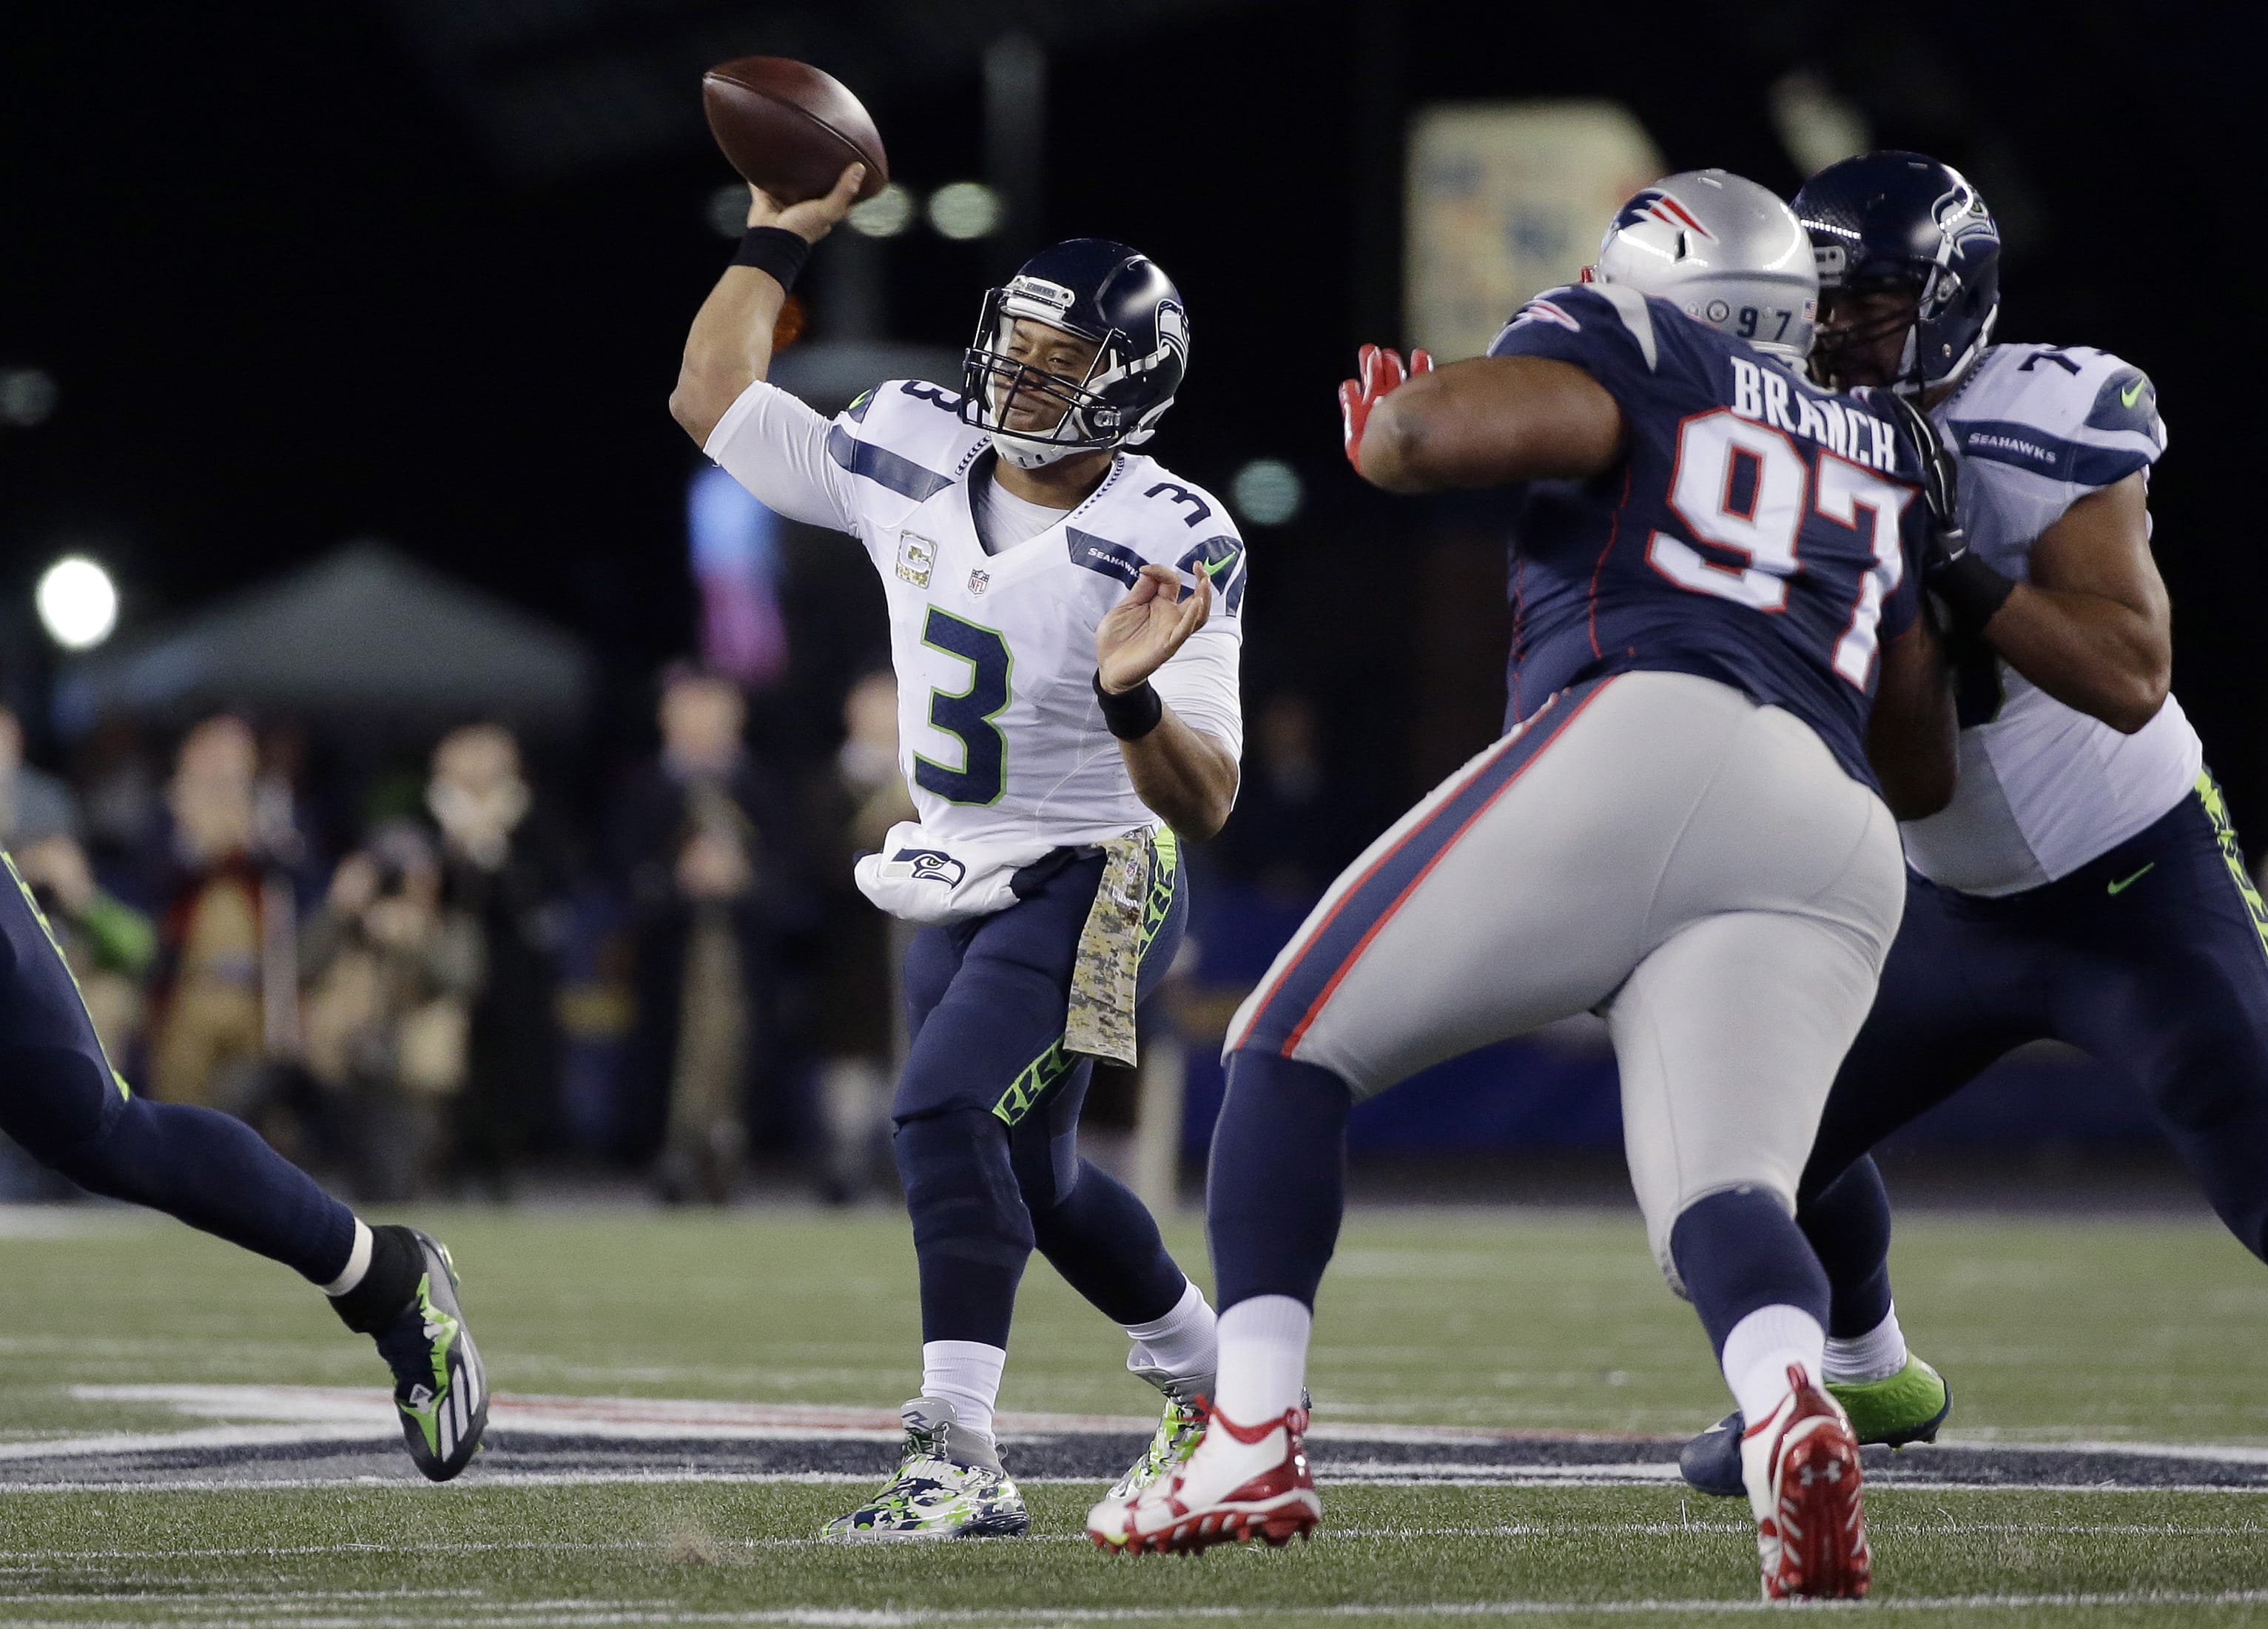 Seattle Seahawks quarterback Russell Wilson (3) passes under pressure by New England Patriots defensive lineman Alan Branch (97) during the first half of an NFL football game, Sunday, Nov. 13, 2016, in Foxborough, Mass.